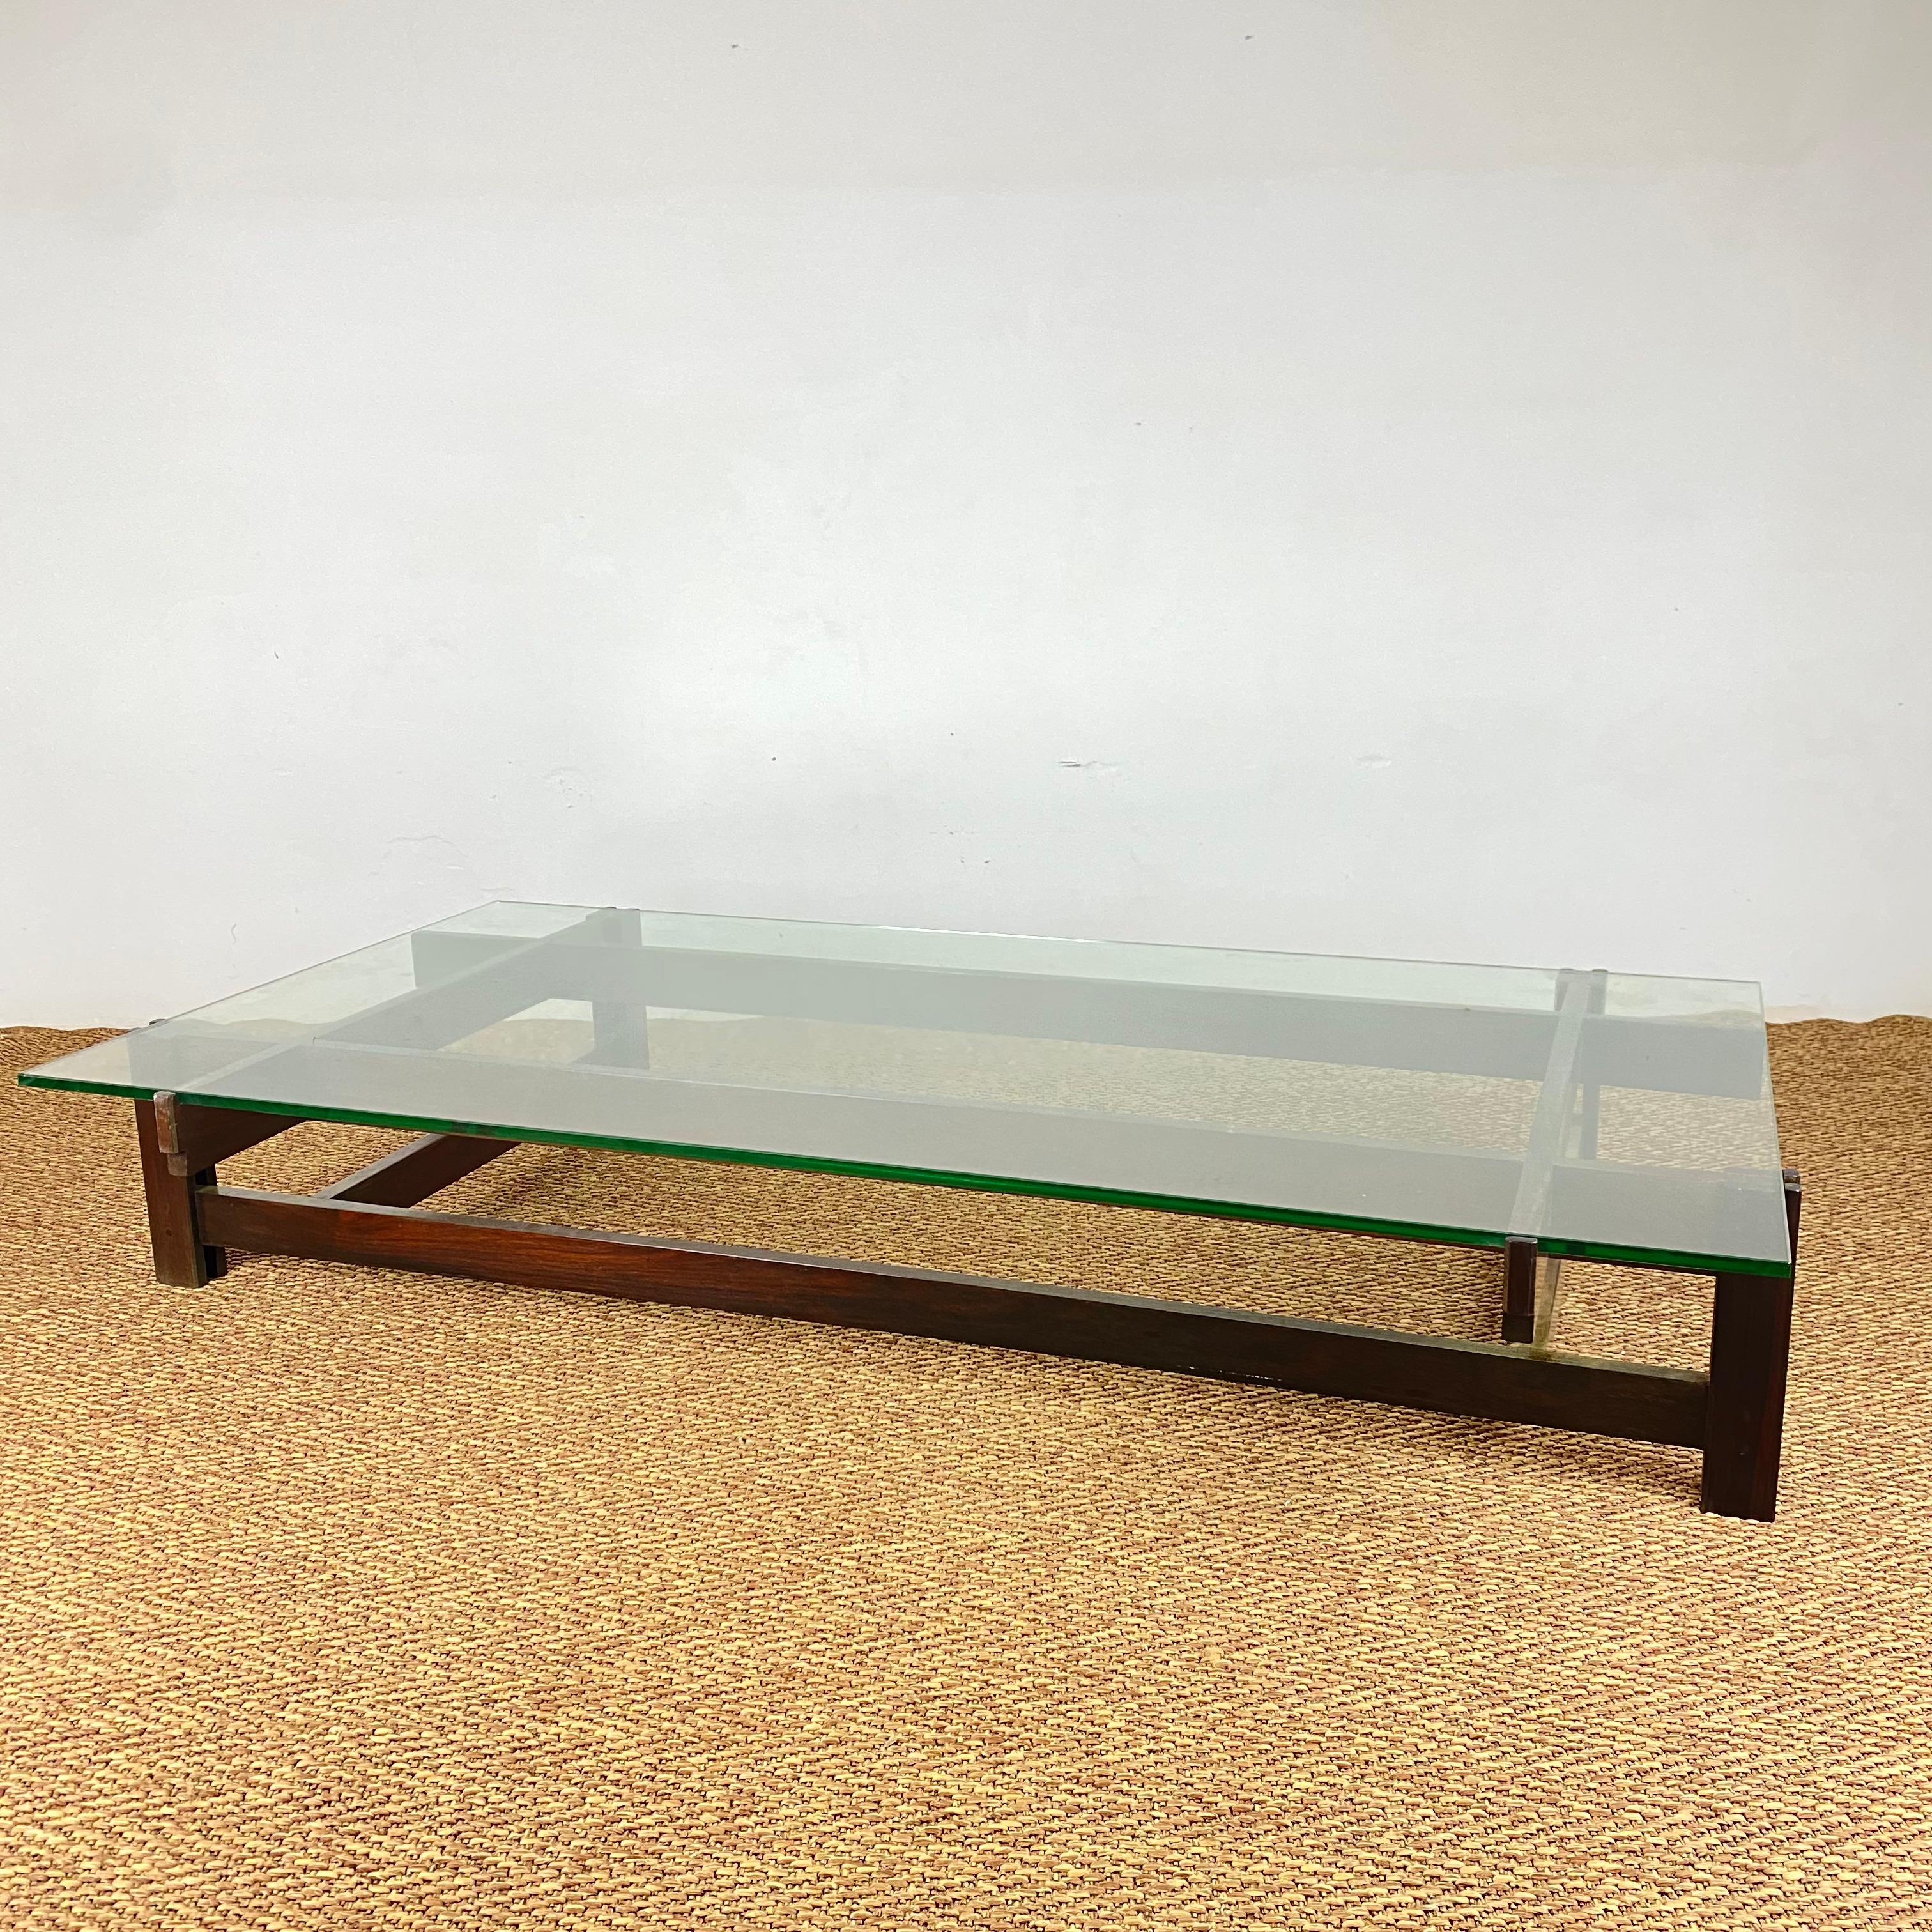 Spectacular rationalist solid palisander wood coffee table, designed by Ico Parisi in the early 1960s and produced by Cassina, signed below.
The object is in perfect condition with some small signs of aging given by its 60 years of life, as shown